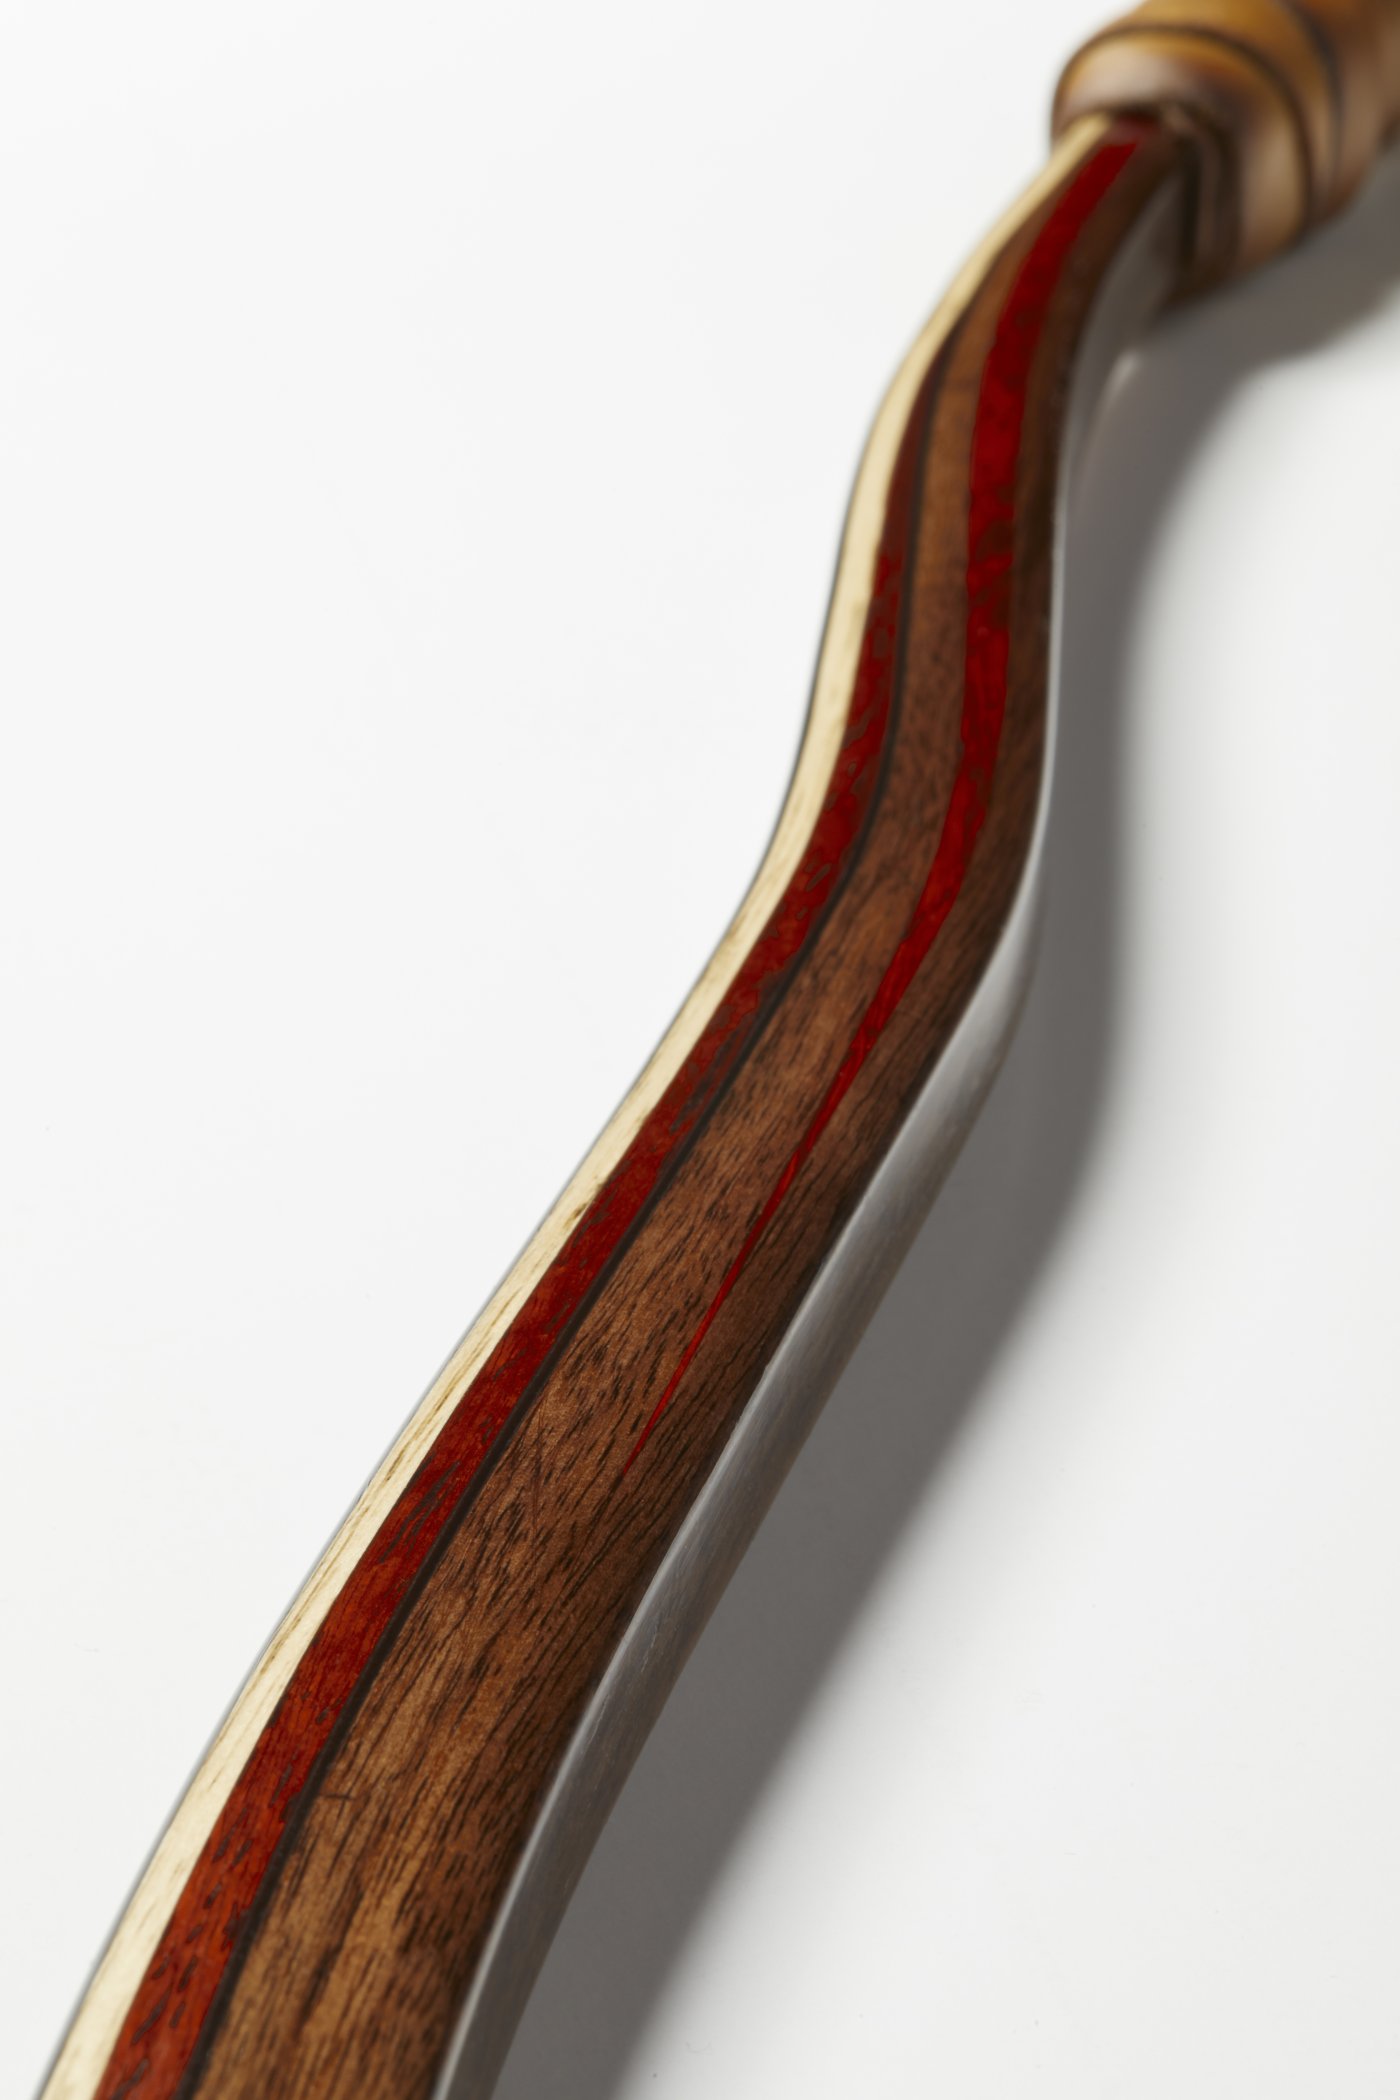 Detail image of the layers of a limber bow.